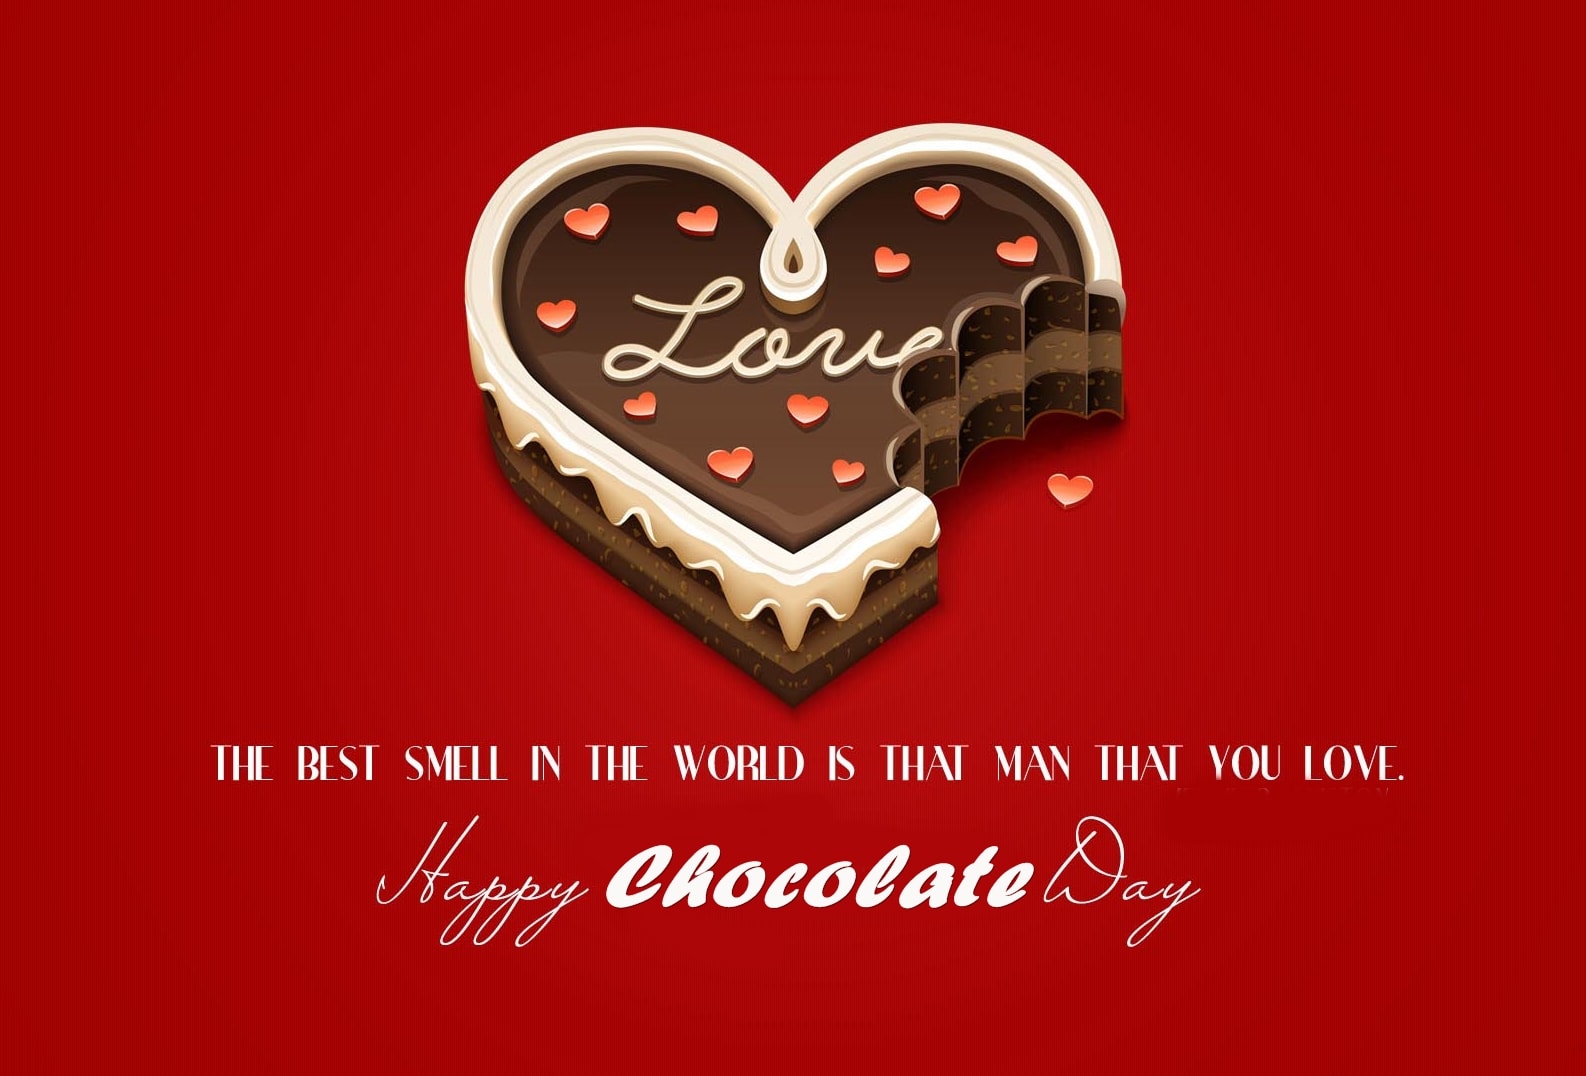 Happy Chocolate Day Poem for Girlfriend for 2018 | Short and Romantic